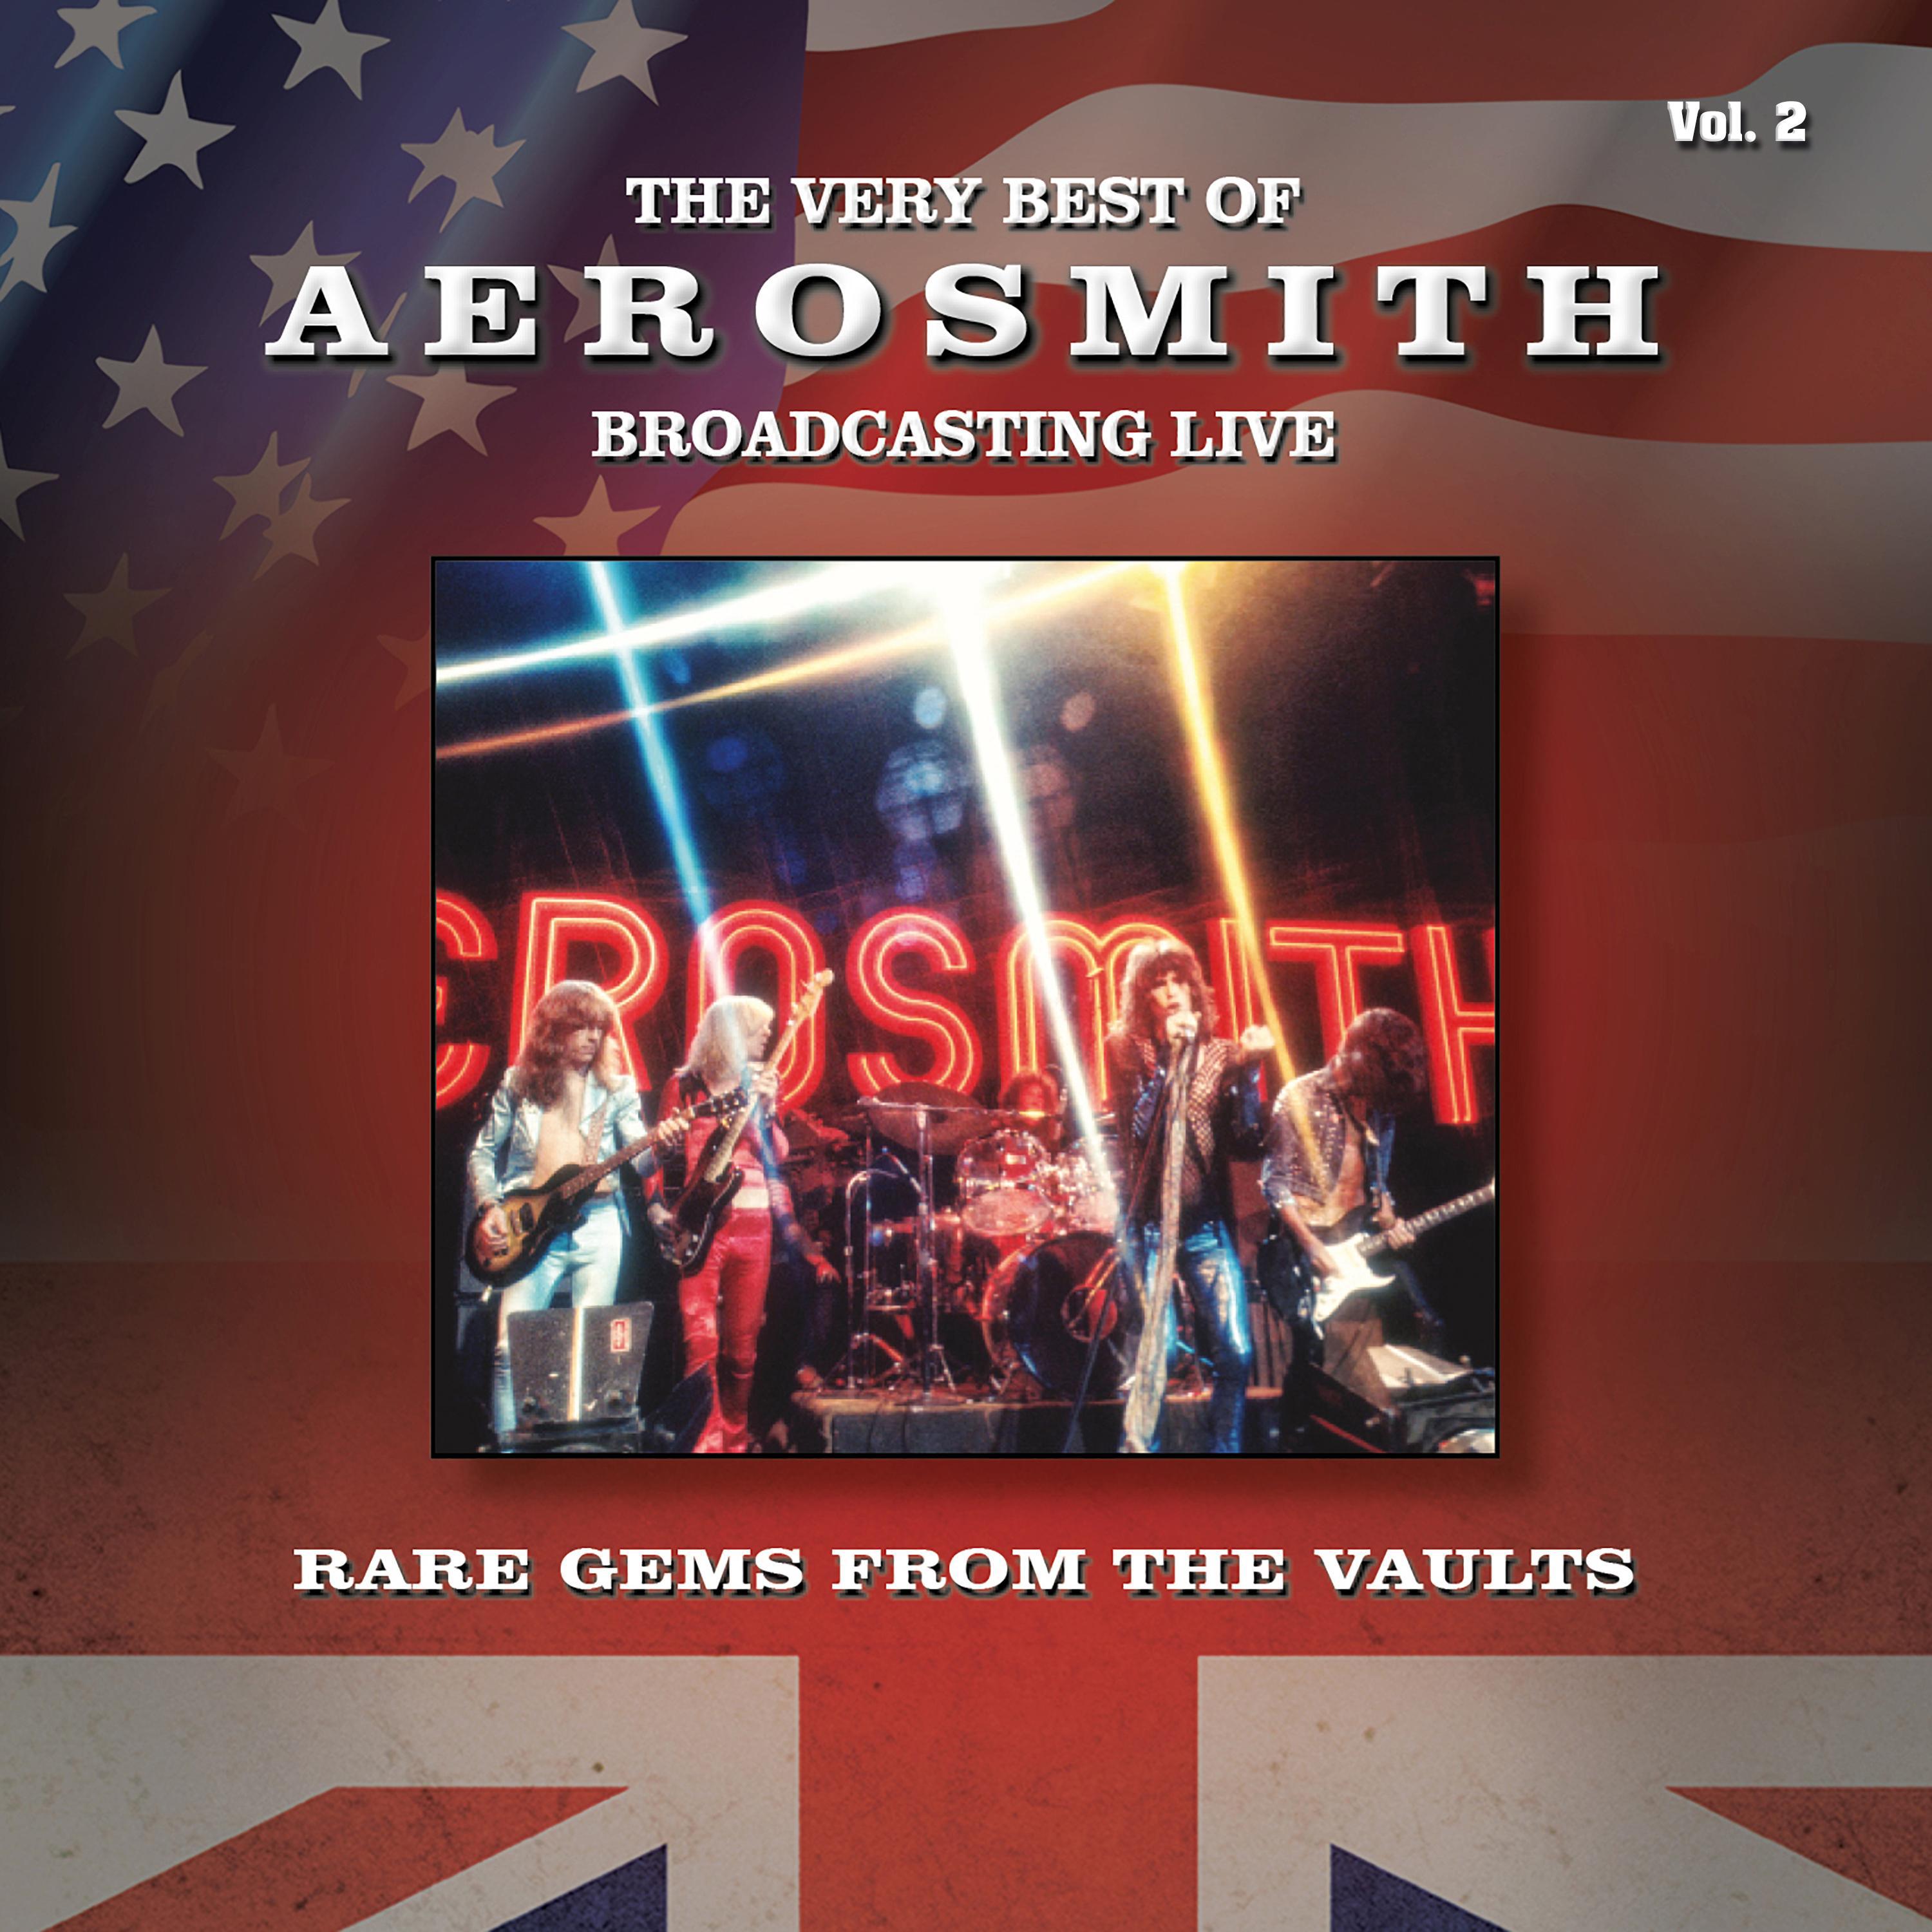 The Very Best of Aerosmith Broadcasting Live, Rare Gems from the Vaults, Vol. 2